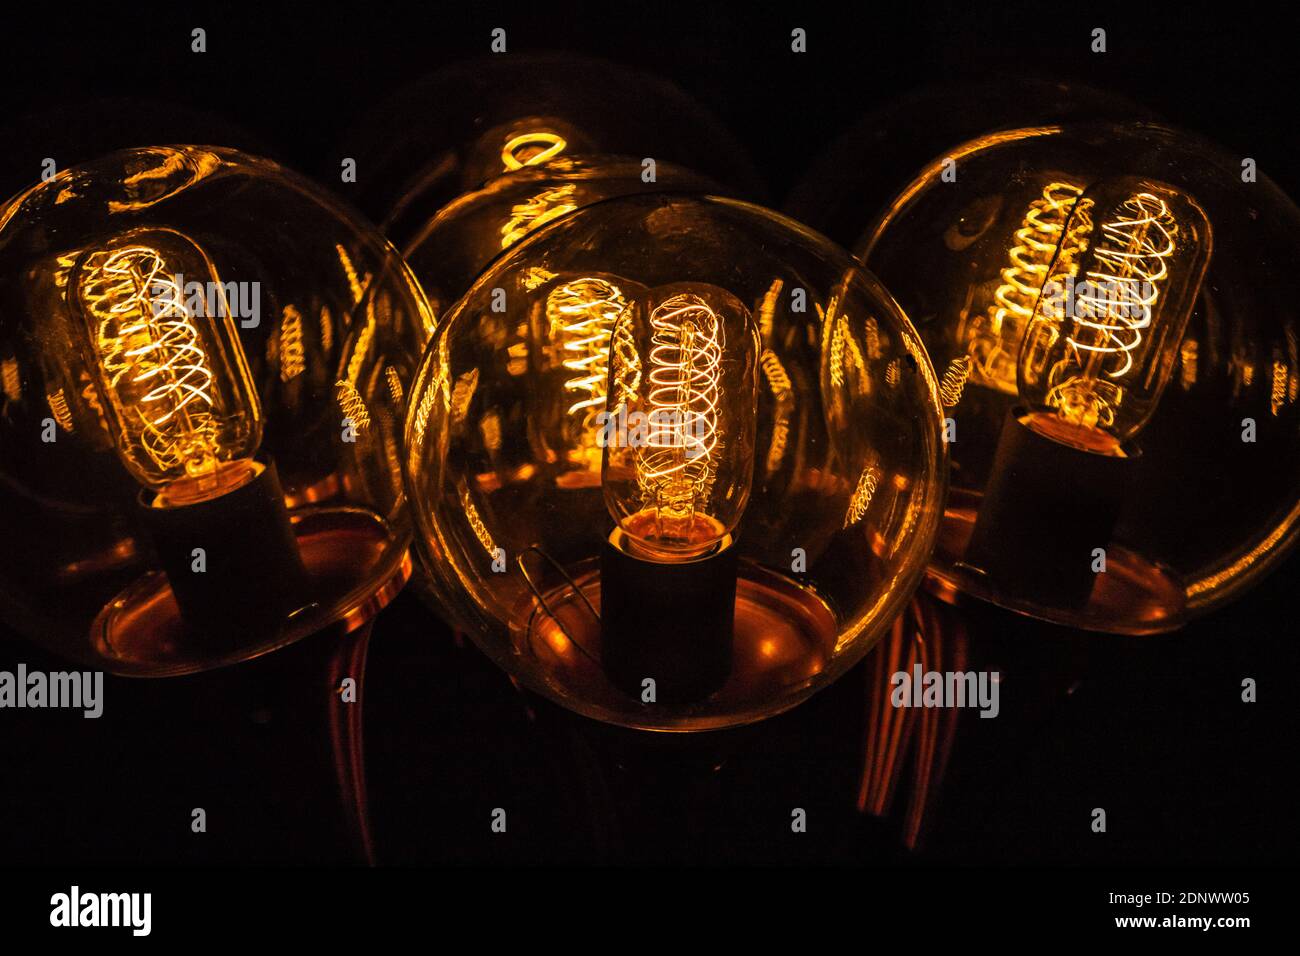 Abstract scene produced by light filaments inside glass bulbs Stock Photo